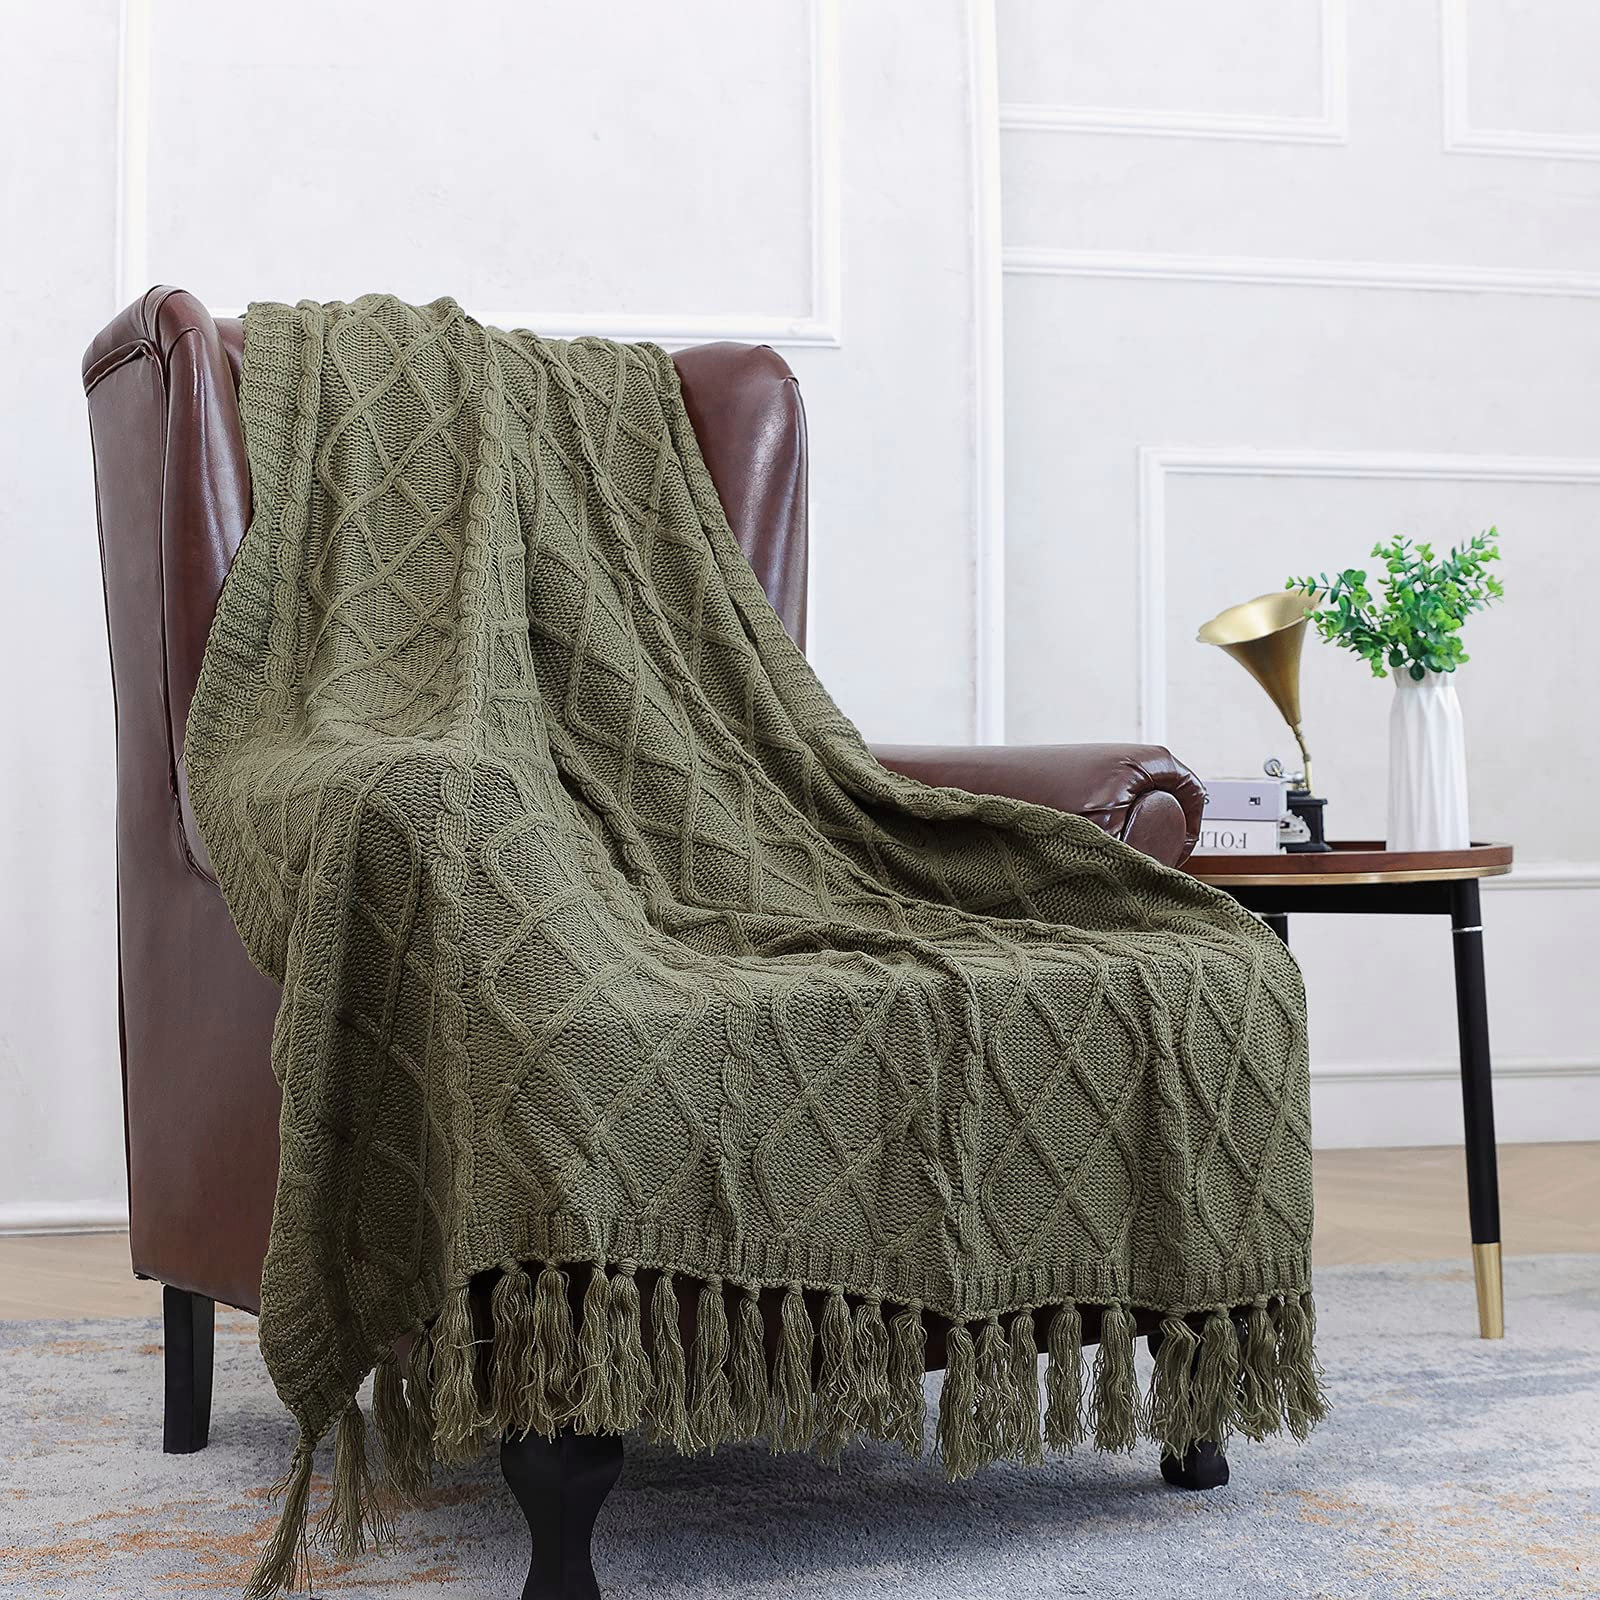 60 x 50 Inch Sea Green Throw Blanket Soft and Warm Living Room Boho Home Decor Decorative Throws for Sofa and Couch Honeycomb Pattern 